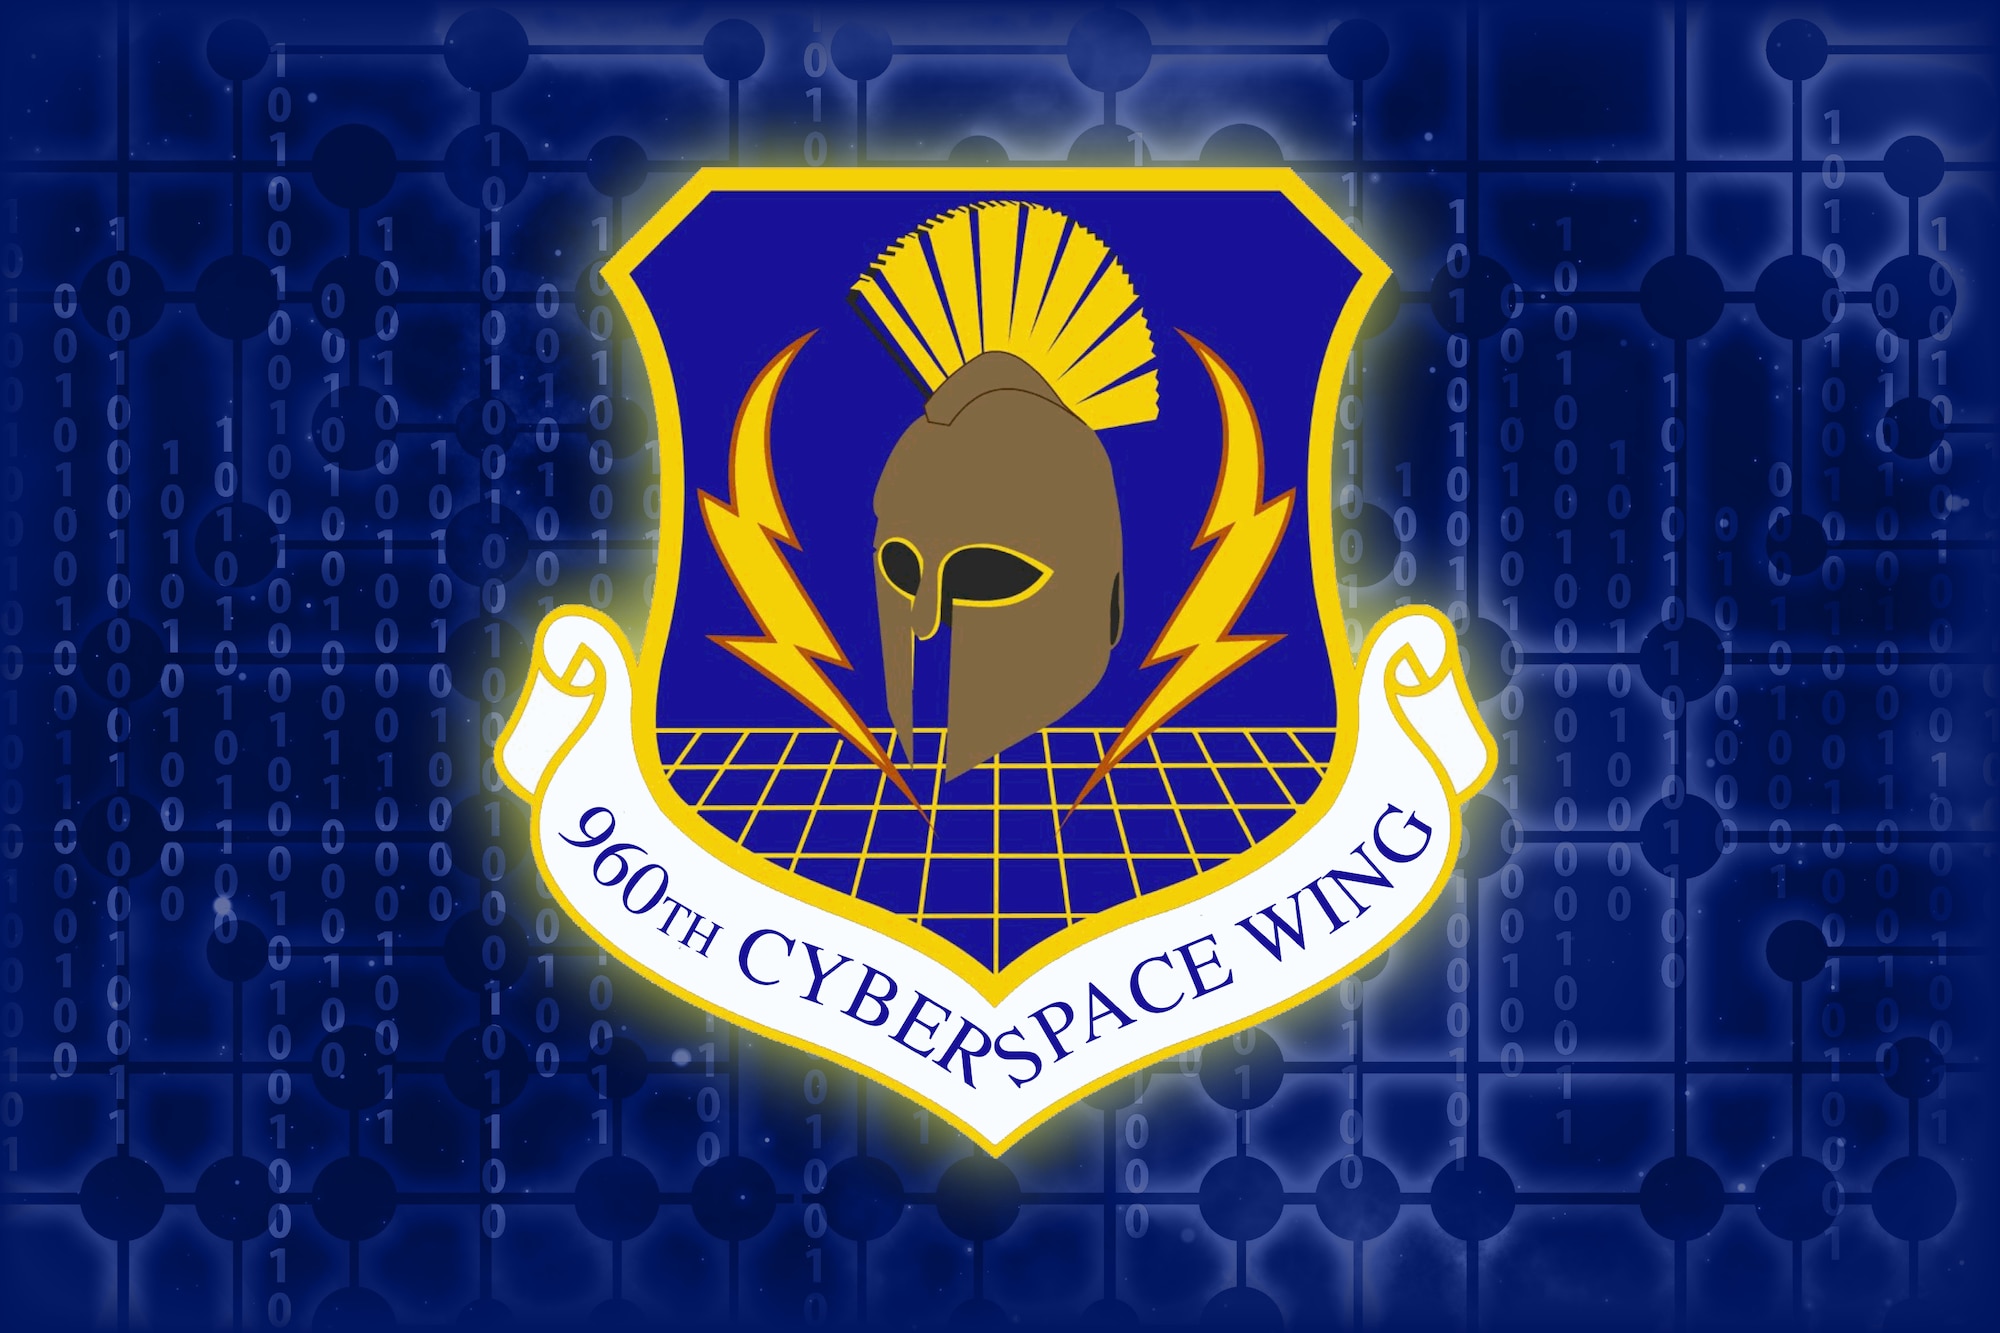 The 960th Cyberspace Wing emblem cover image created Jan. 19, 2021, at Joint Base San Antonio-Chapman Training Annex, Texas. (U.S. Air Force image by Samantha Mathison)